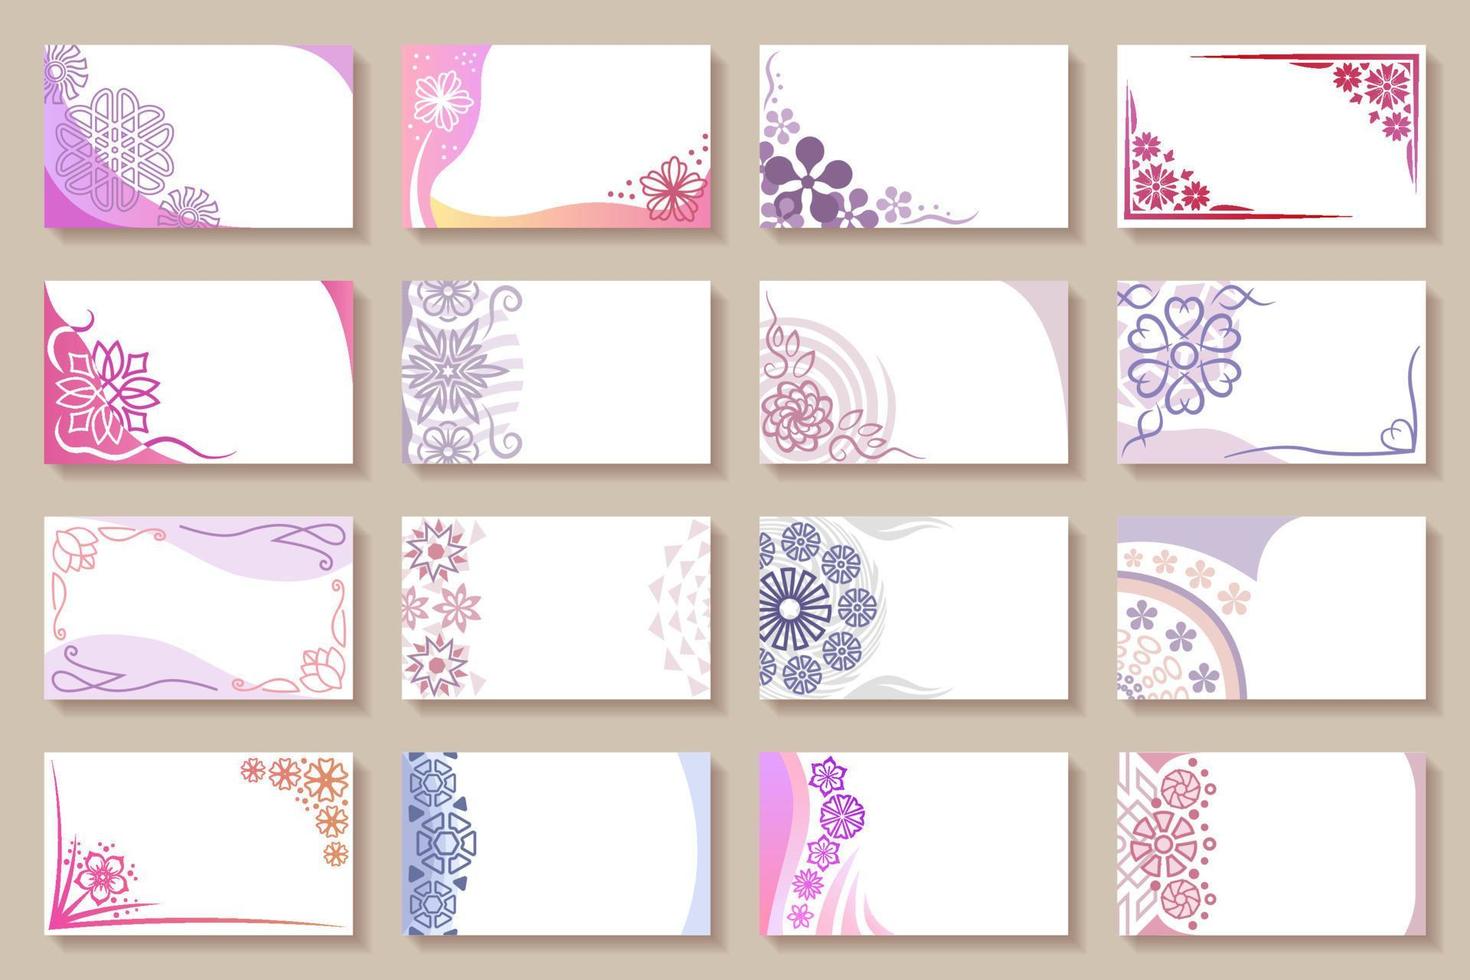 Floral card designs. Cards, postcards with abstract floral design elements. Cards for wedding, Mother's day, Valentine's day, March 8 and other. vector